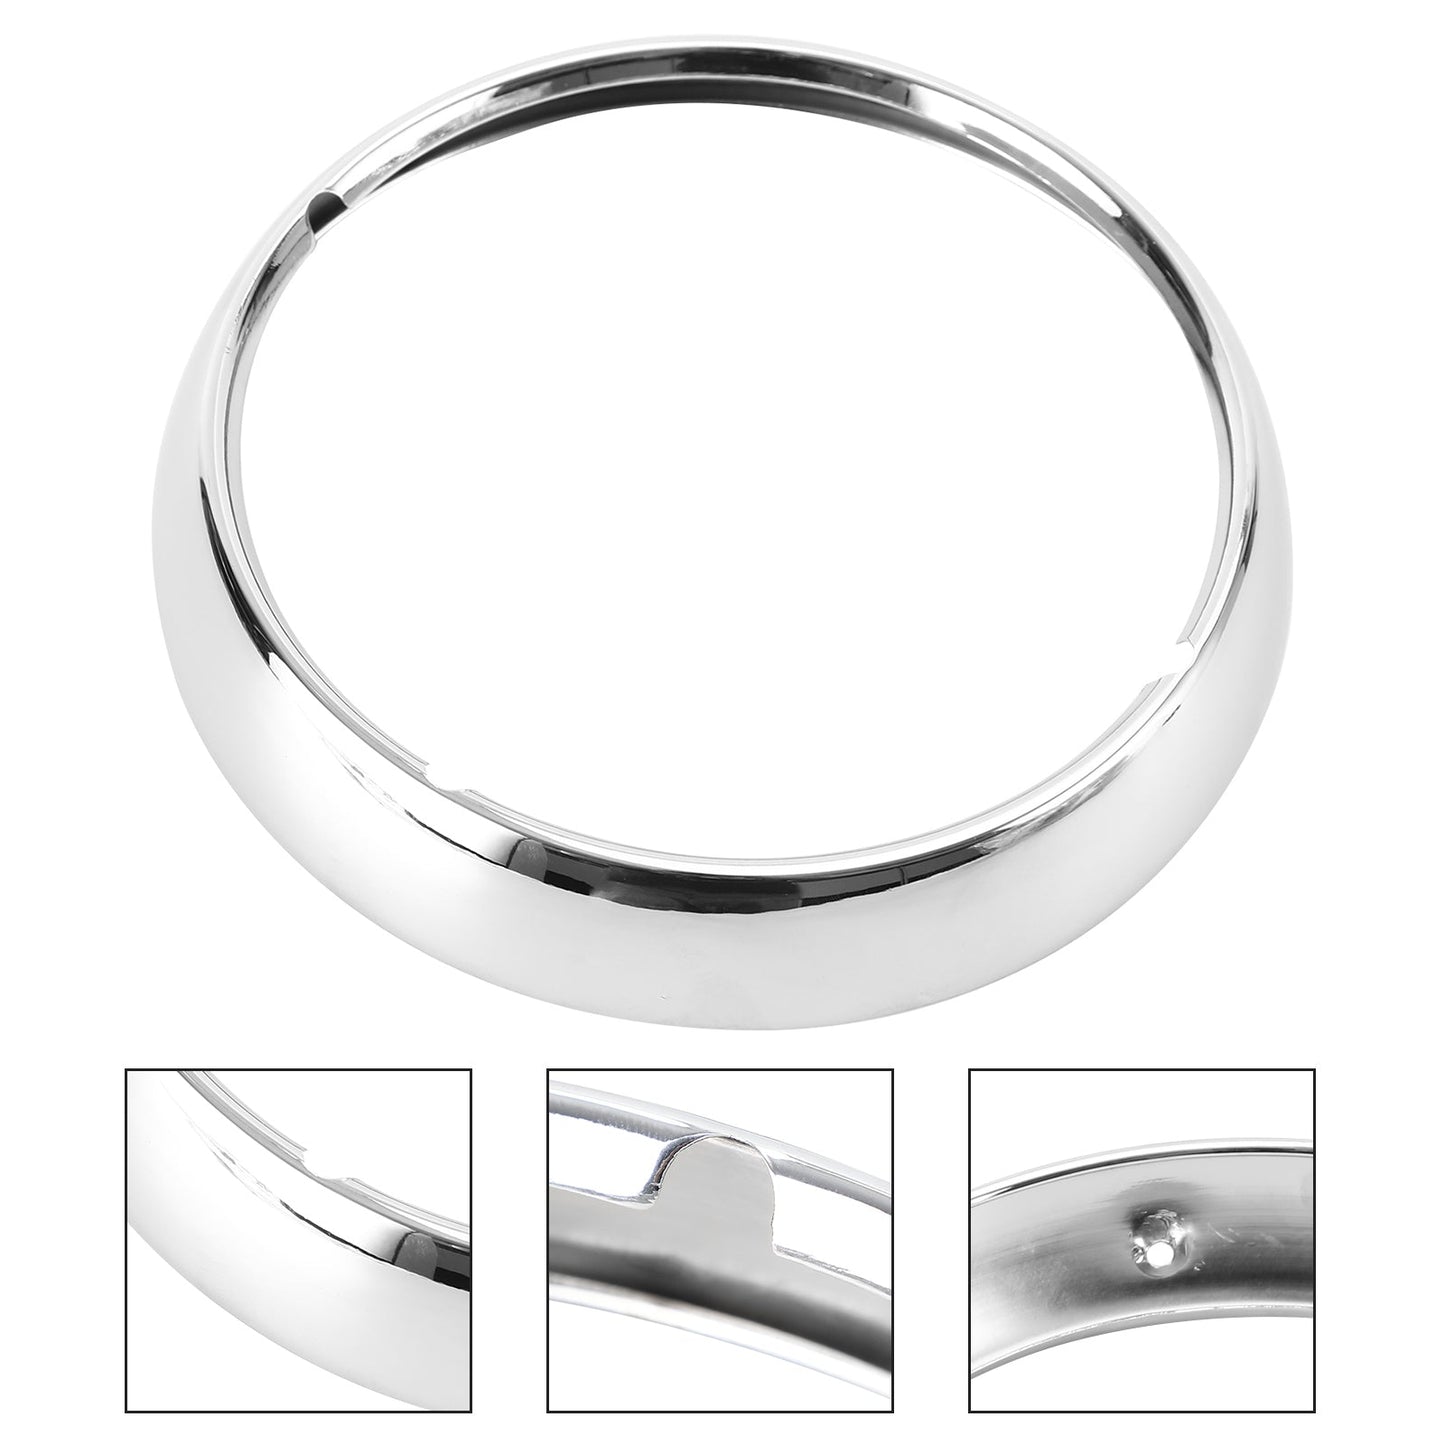 7" Chrome Headlight Trim Ring Light Cover for Touring Road King 67712-83A